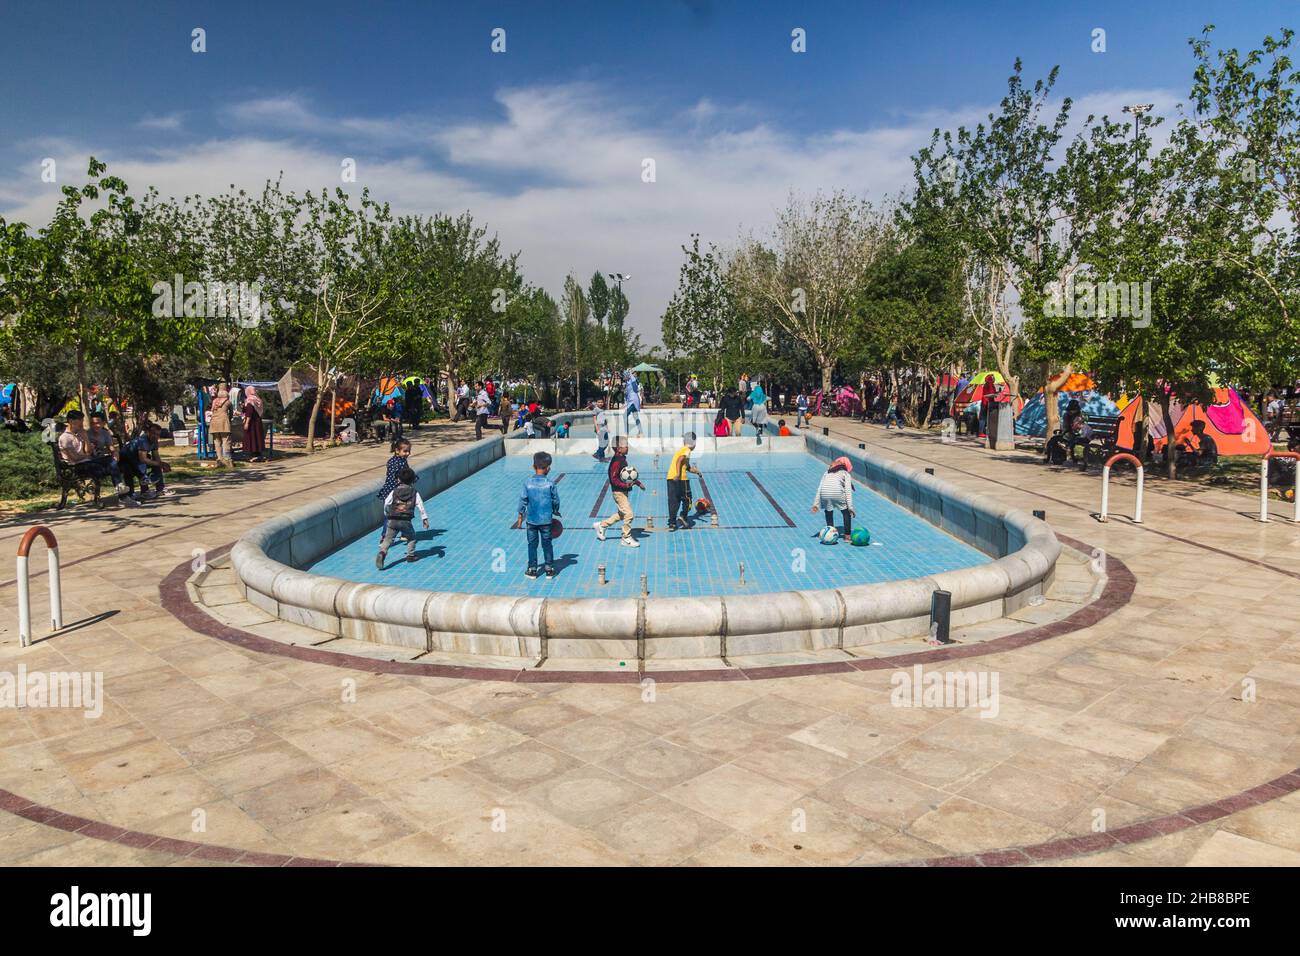 TEHRAN, IRAN - APRIL 2, 2018: People are camping and children playing in the park around Mausoleum of Ruhollah Khomeini near Tehran during the Nowruz Stock Photo